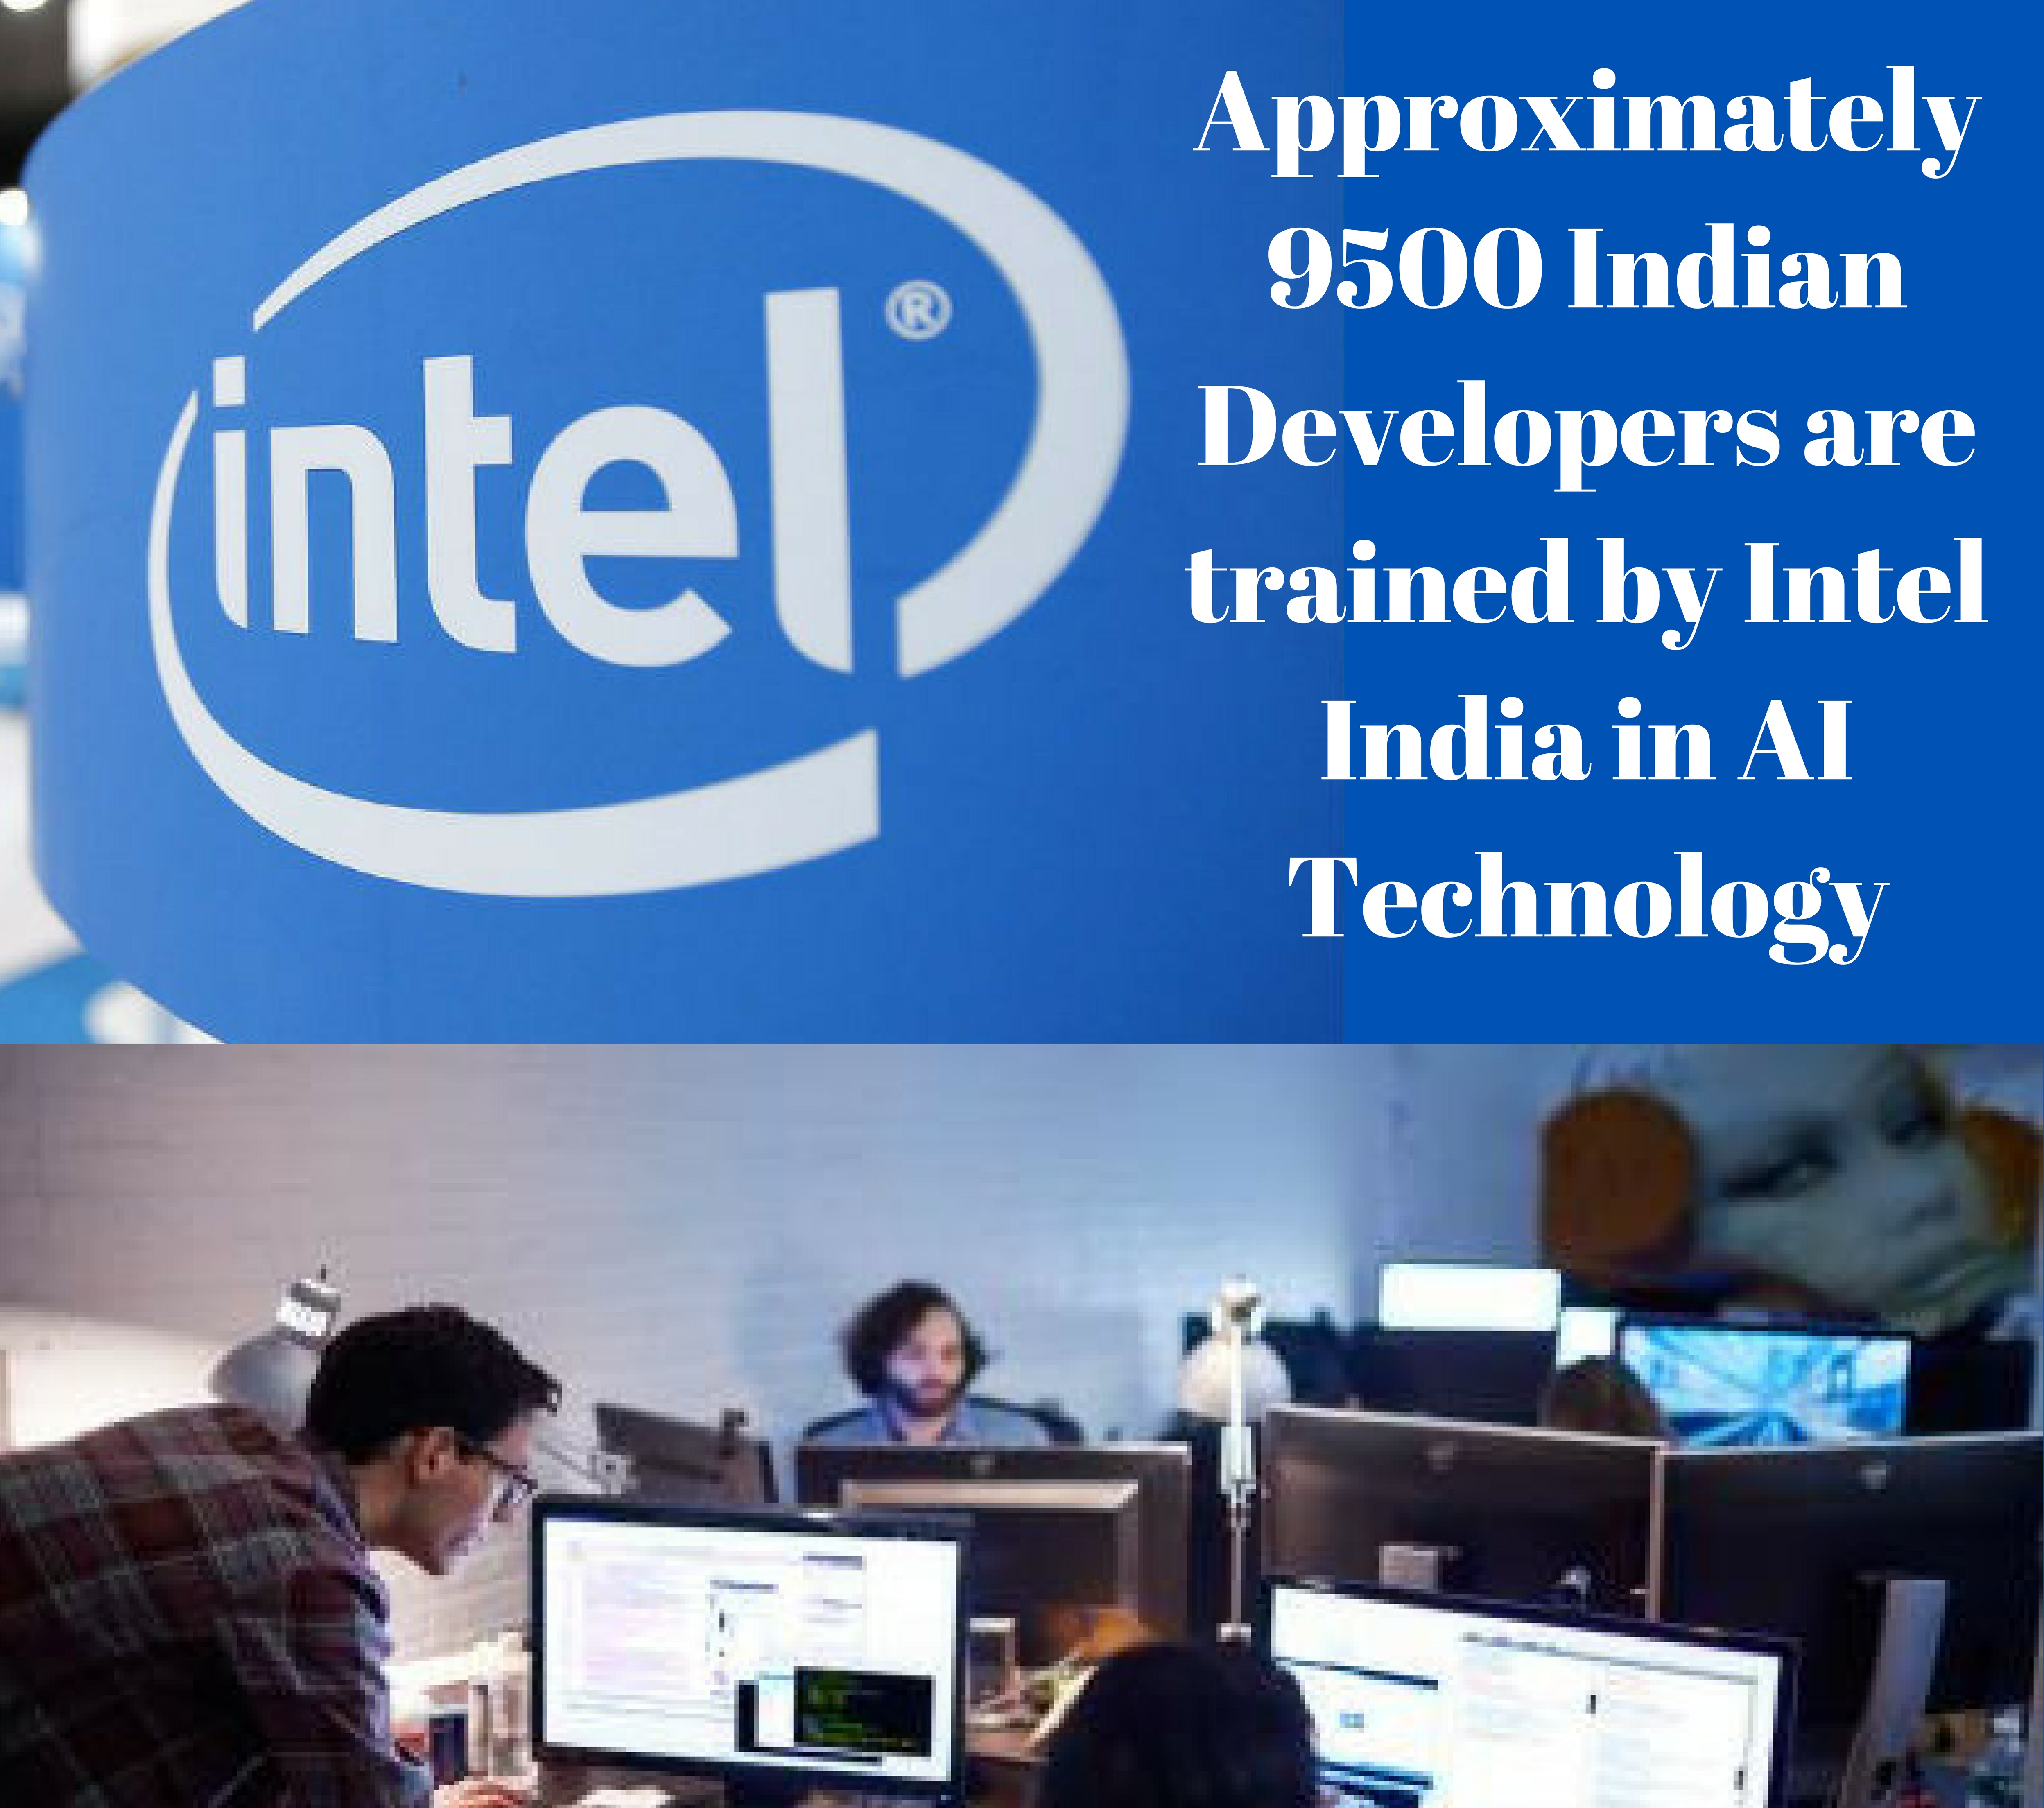 Approximately 9500 Indian Developers are trained by Intel India in AI Technology